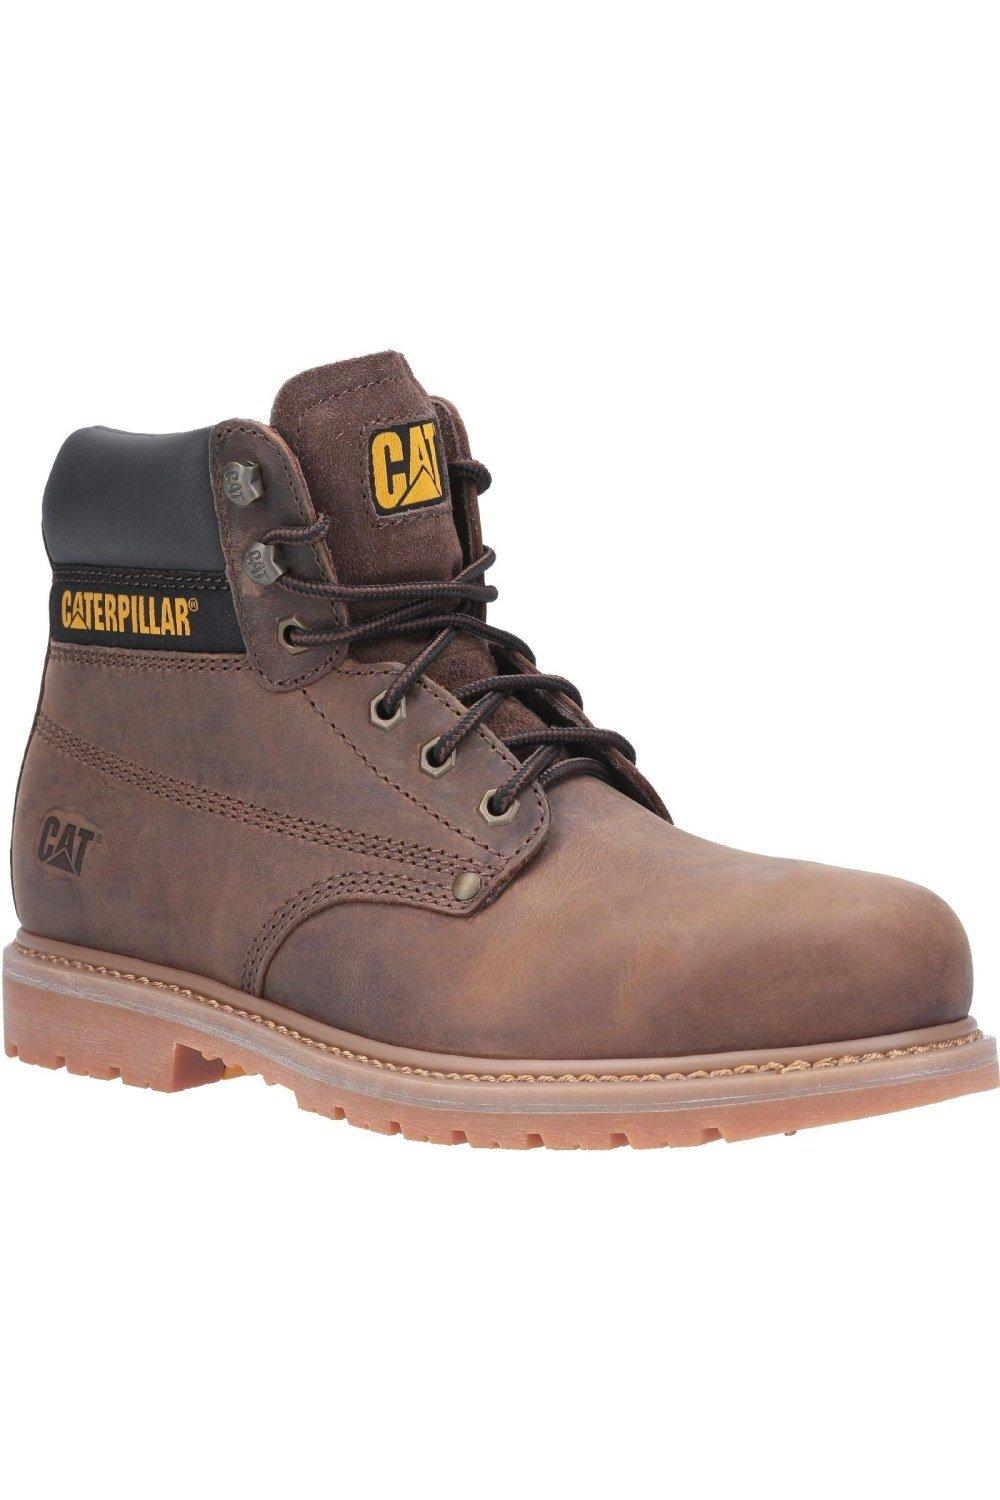 powerplant gyw leather safety boot